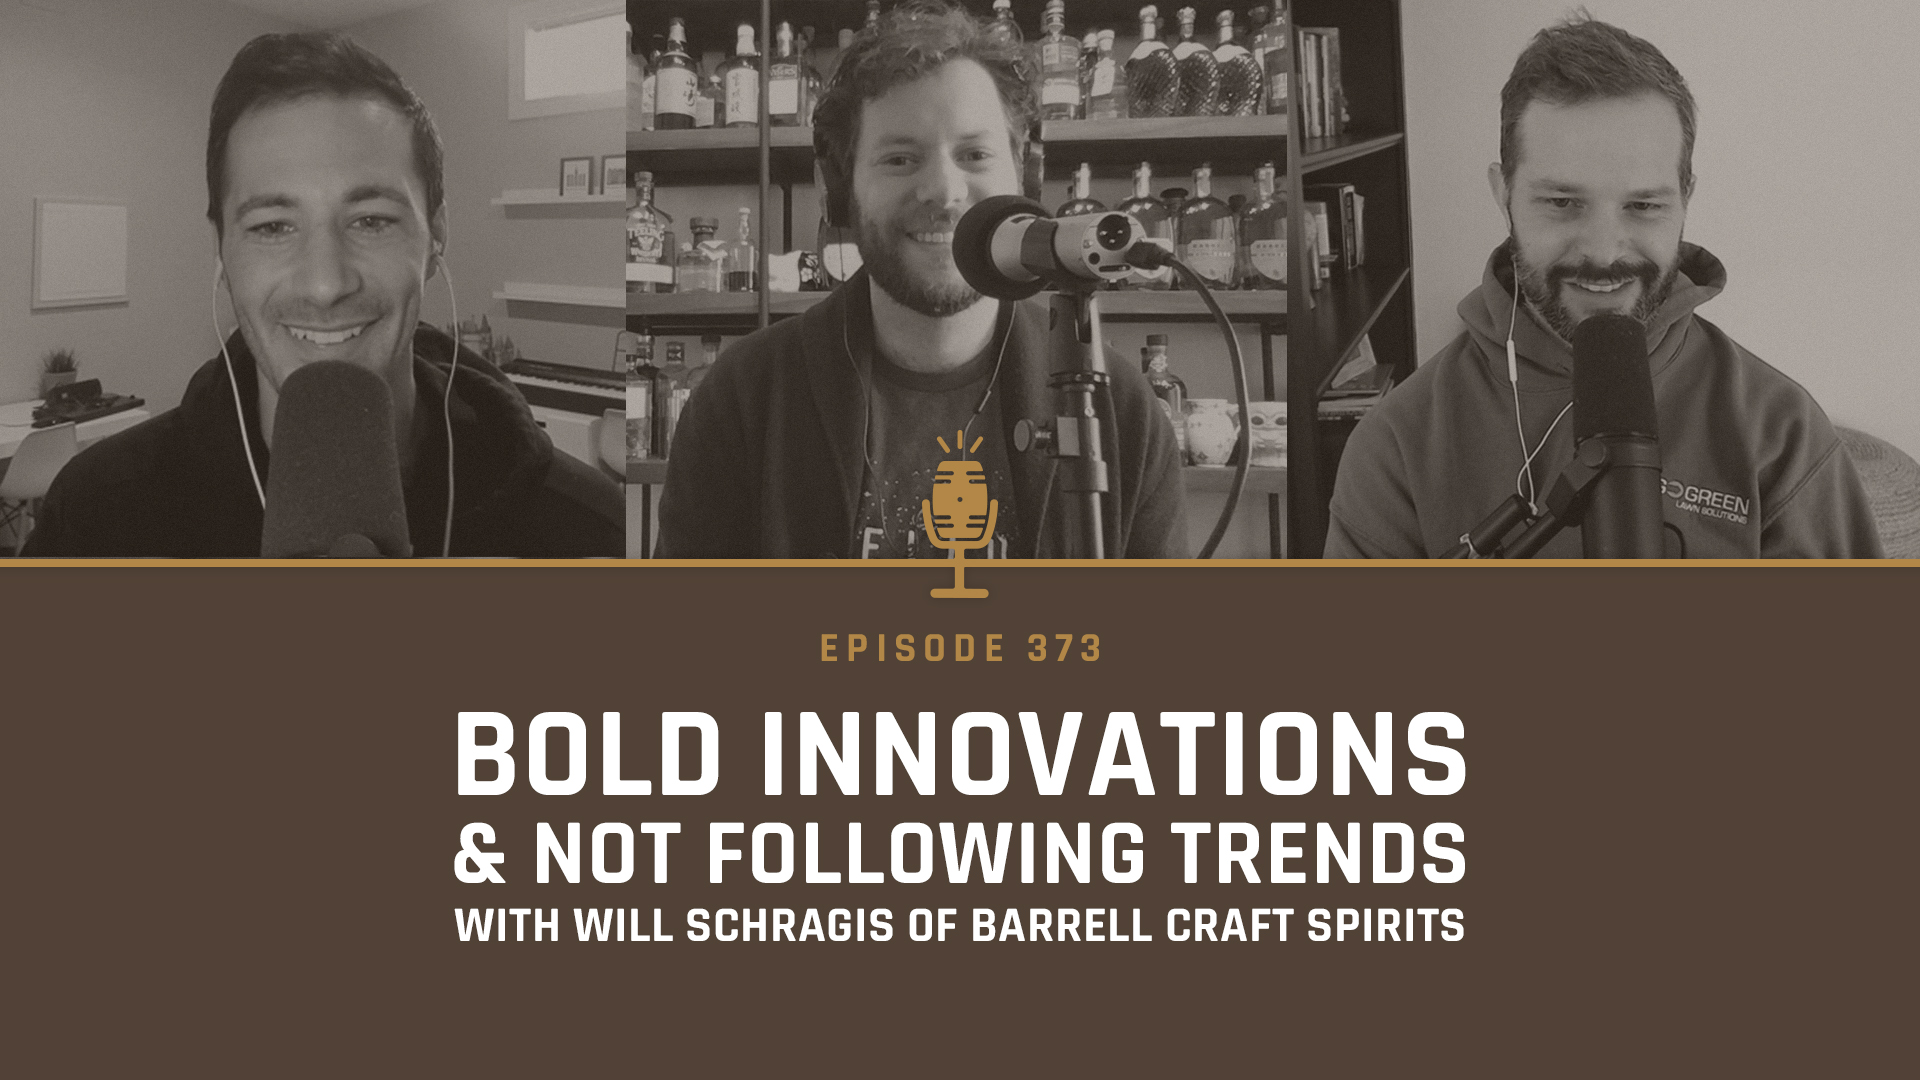 373 - Bold Innovations And Not Following Trends with Will Schragis of Barrell Craft Spirits